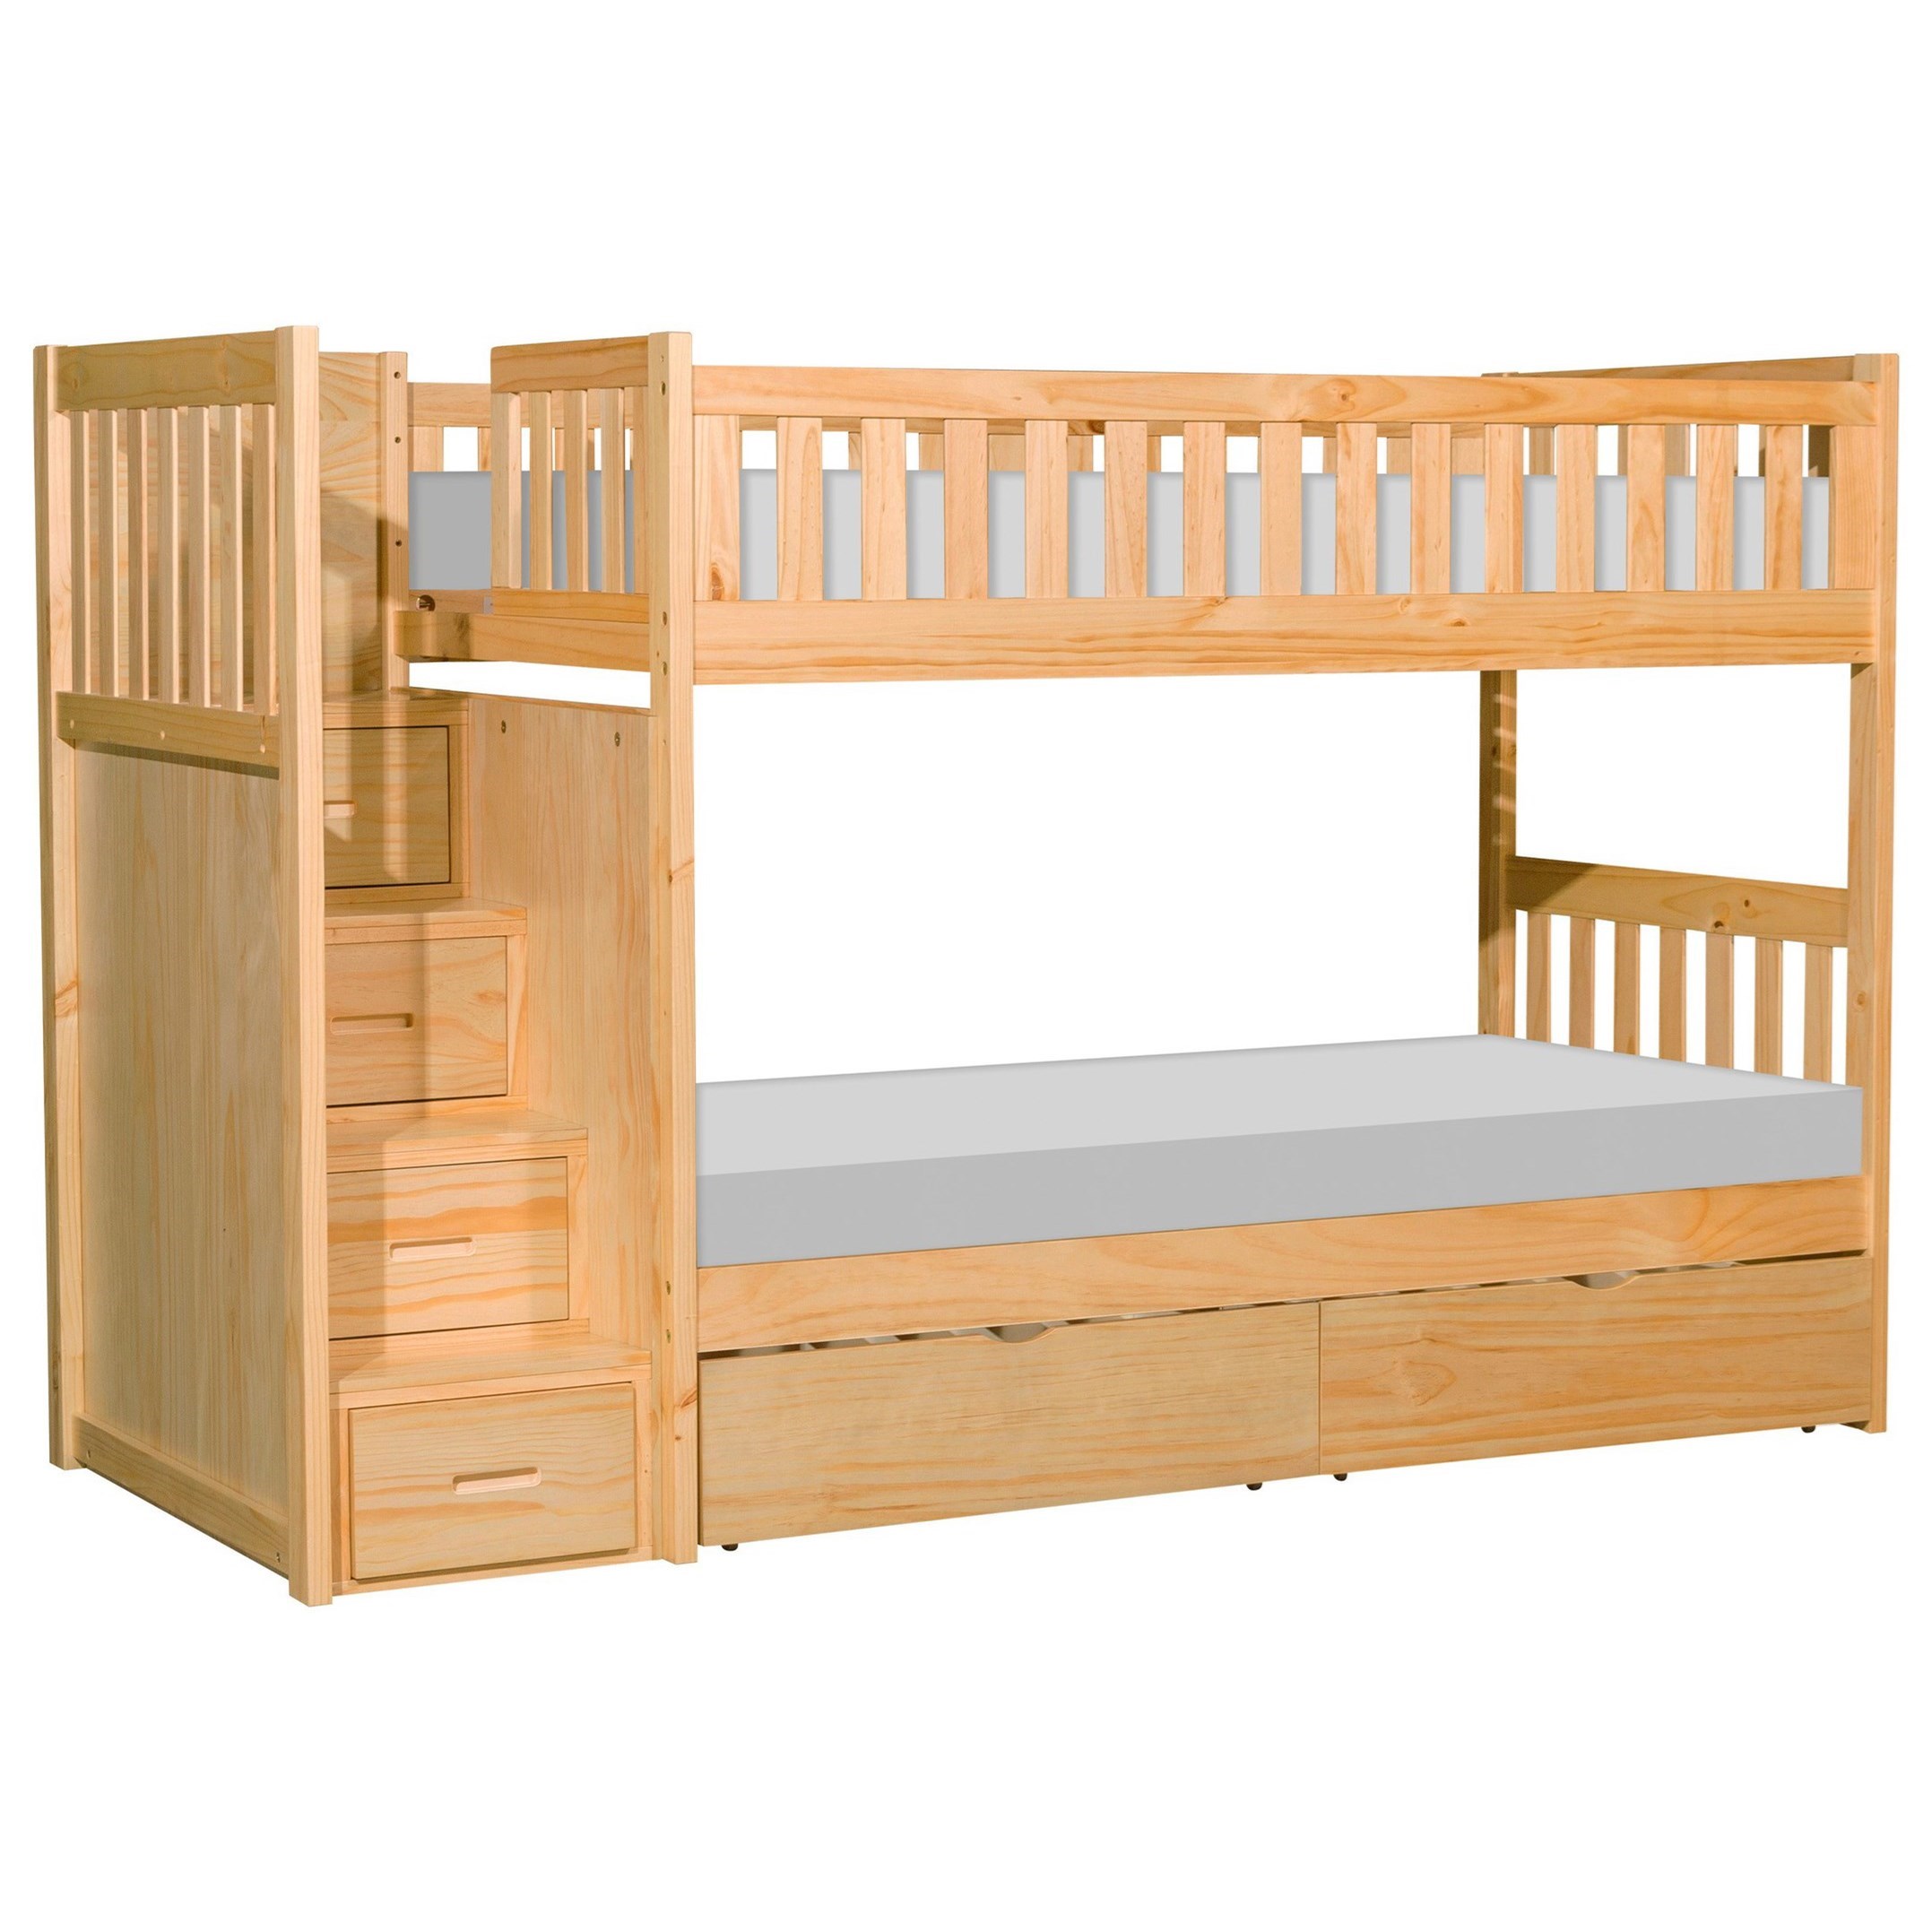 bunk bed 3 in 1